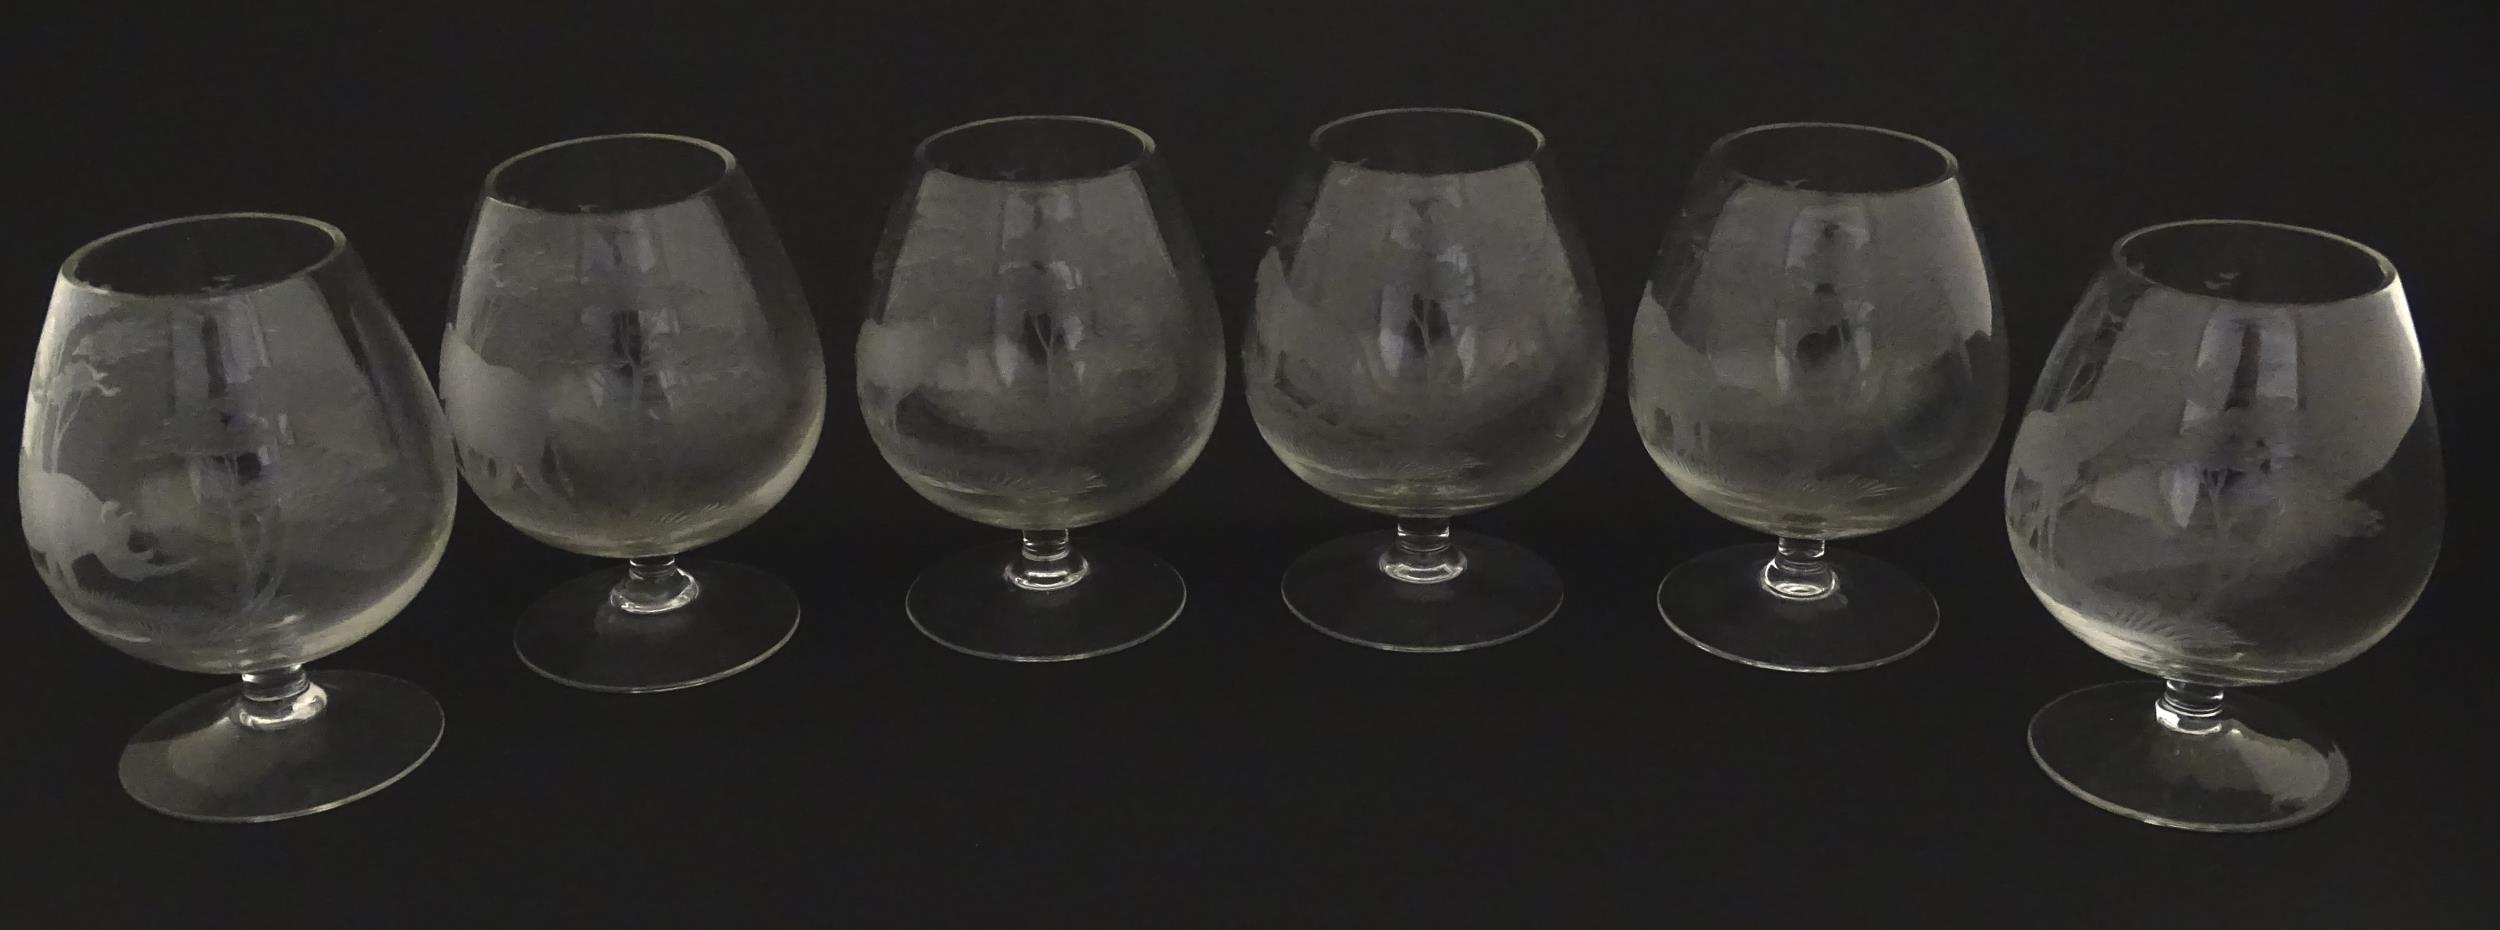 Six Rowland Ward brandy glasses with engraved Safari animal detail. Unsigned Approx. 4 3/4" high (6) - Image 11 of 14